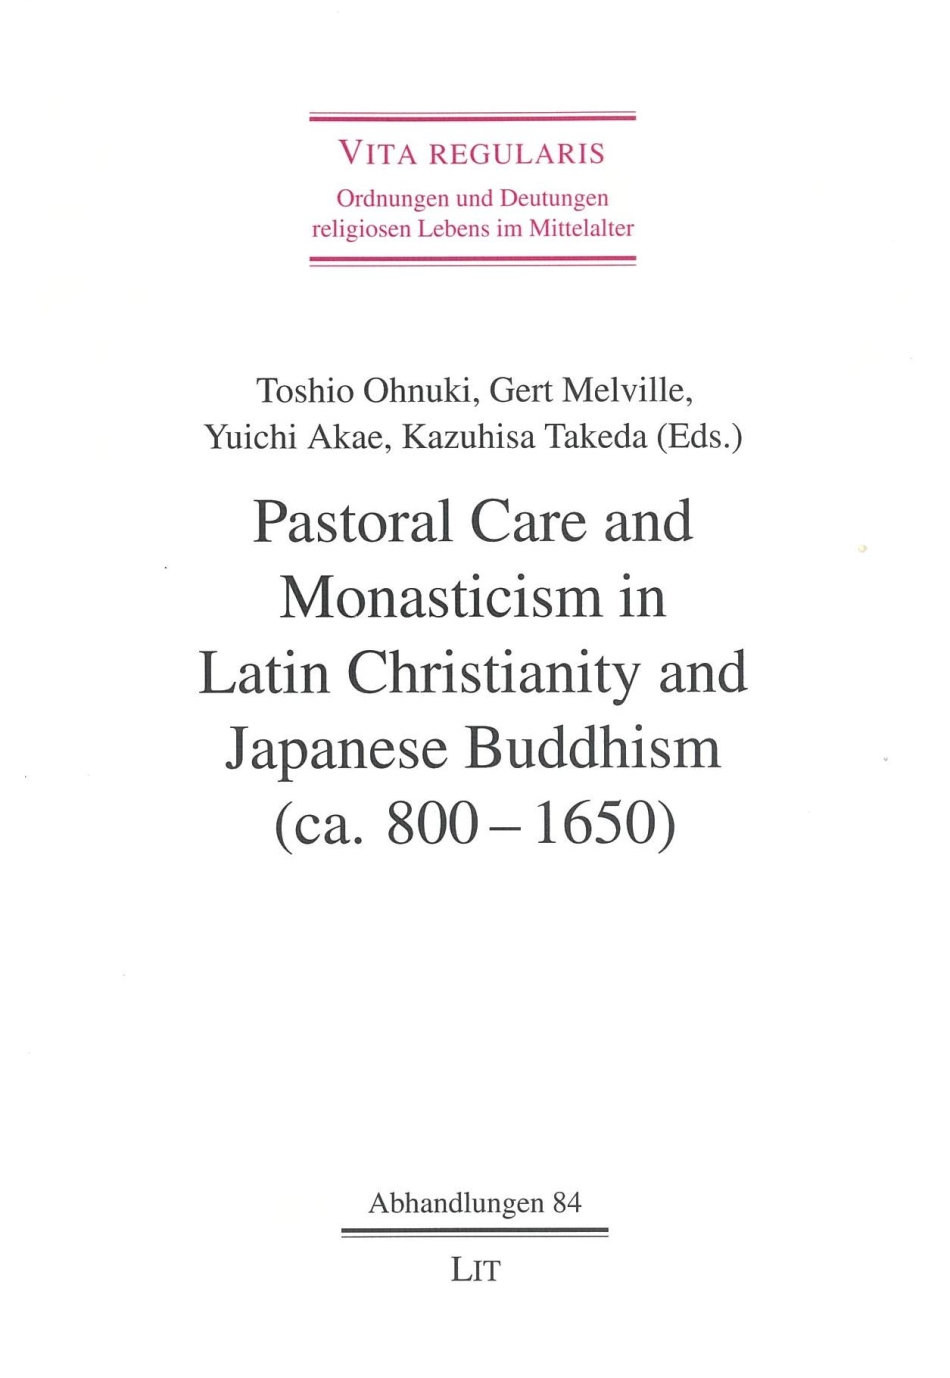 Pastoral Care and Monasticism in Latin Christianity and Japanese Buddhism (ca. 800 - 1650).